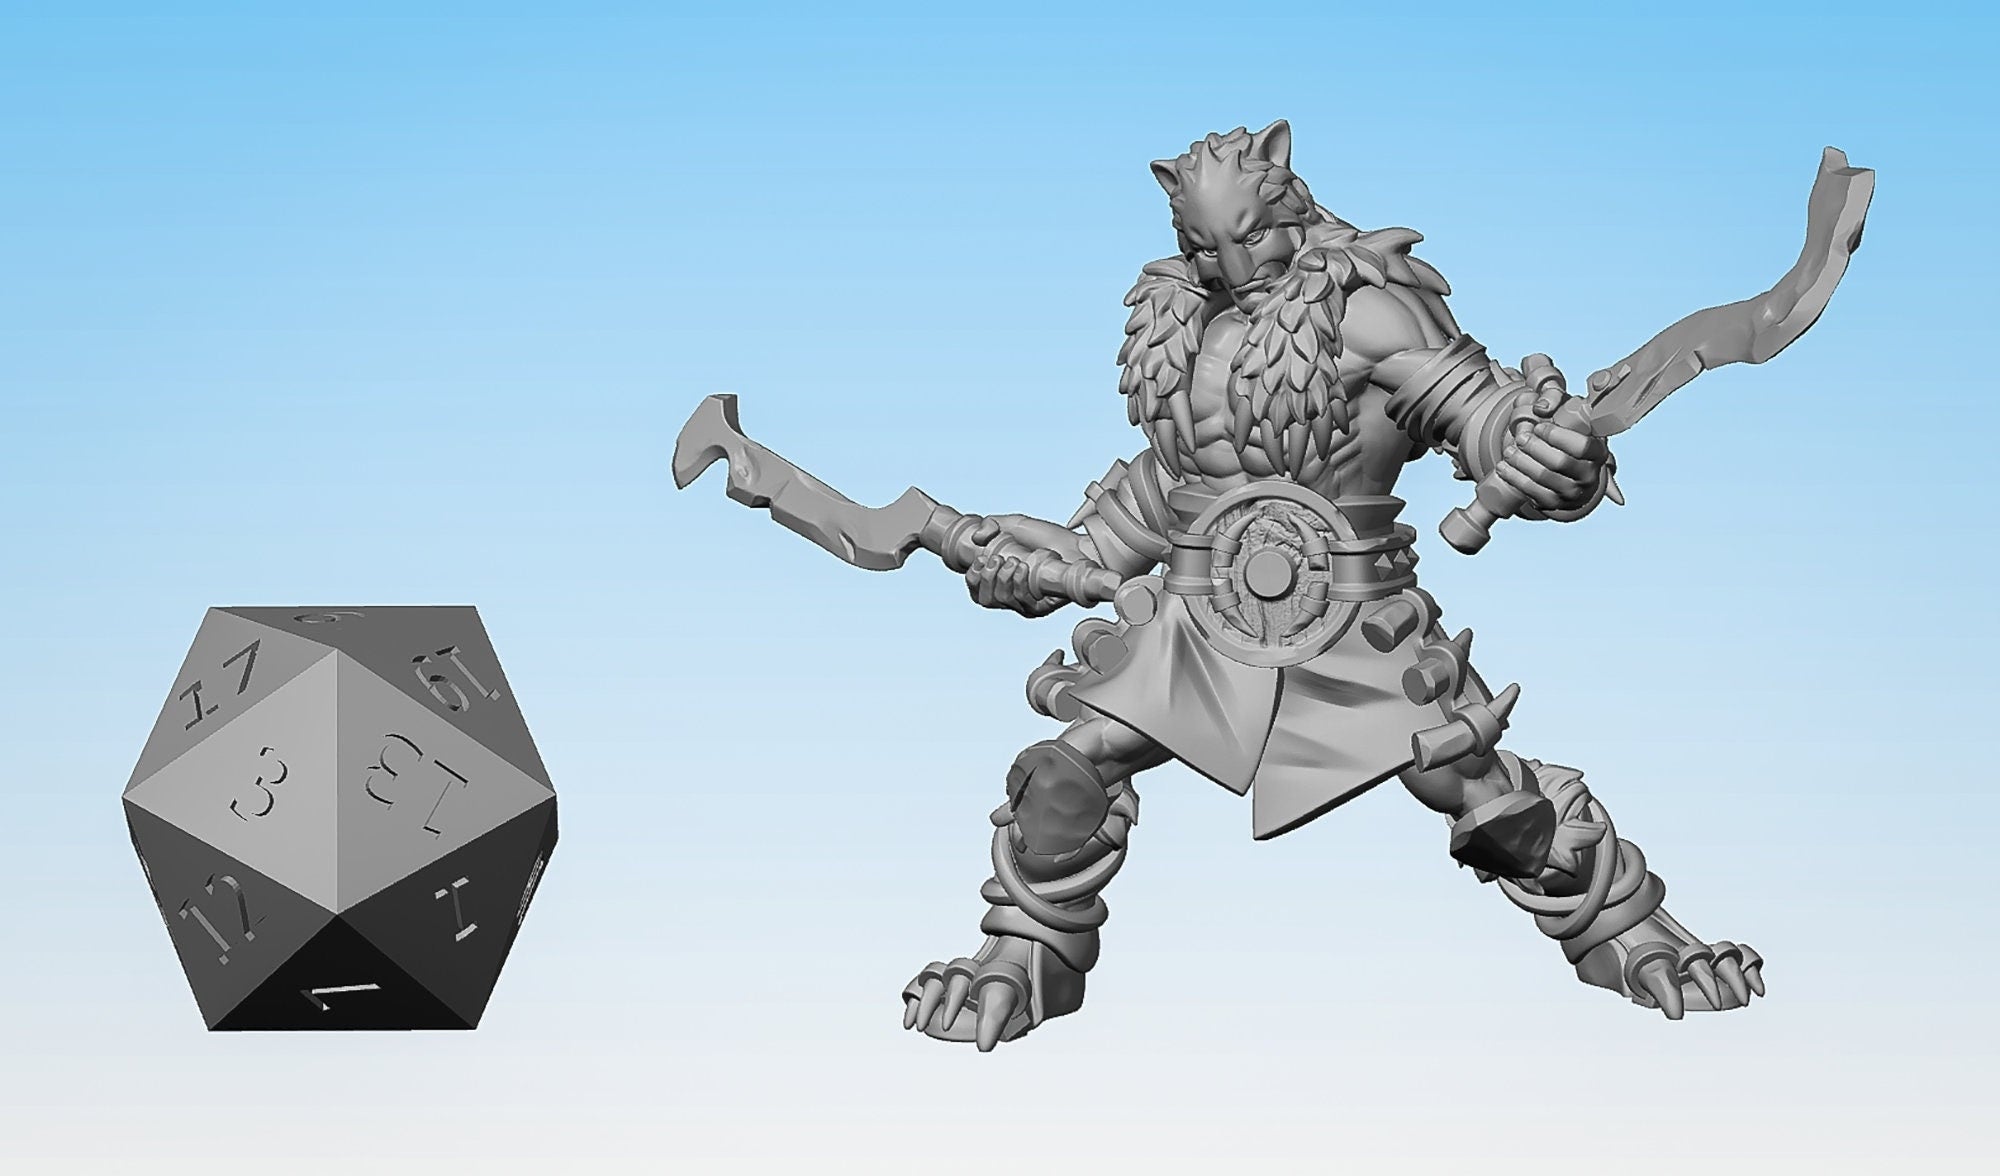 Beast Master "Swords"-Role Playing Miniatures